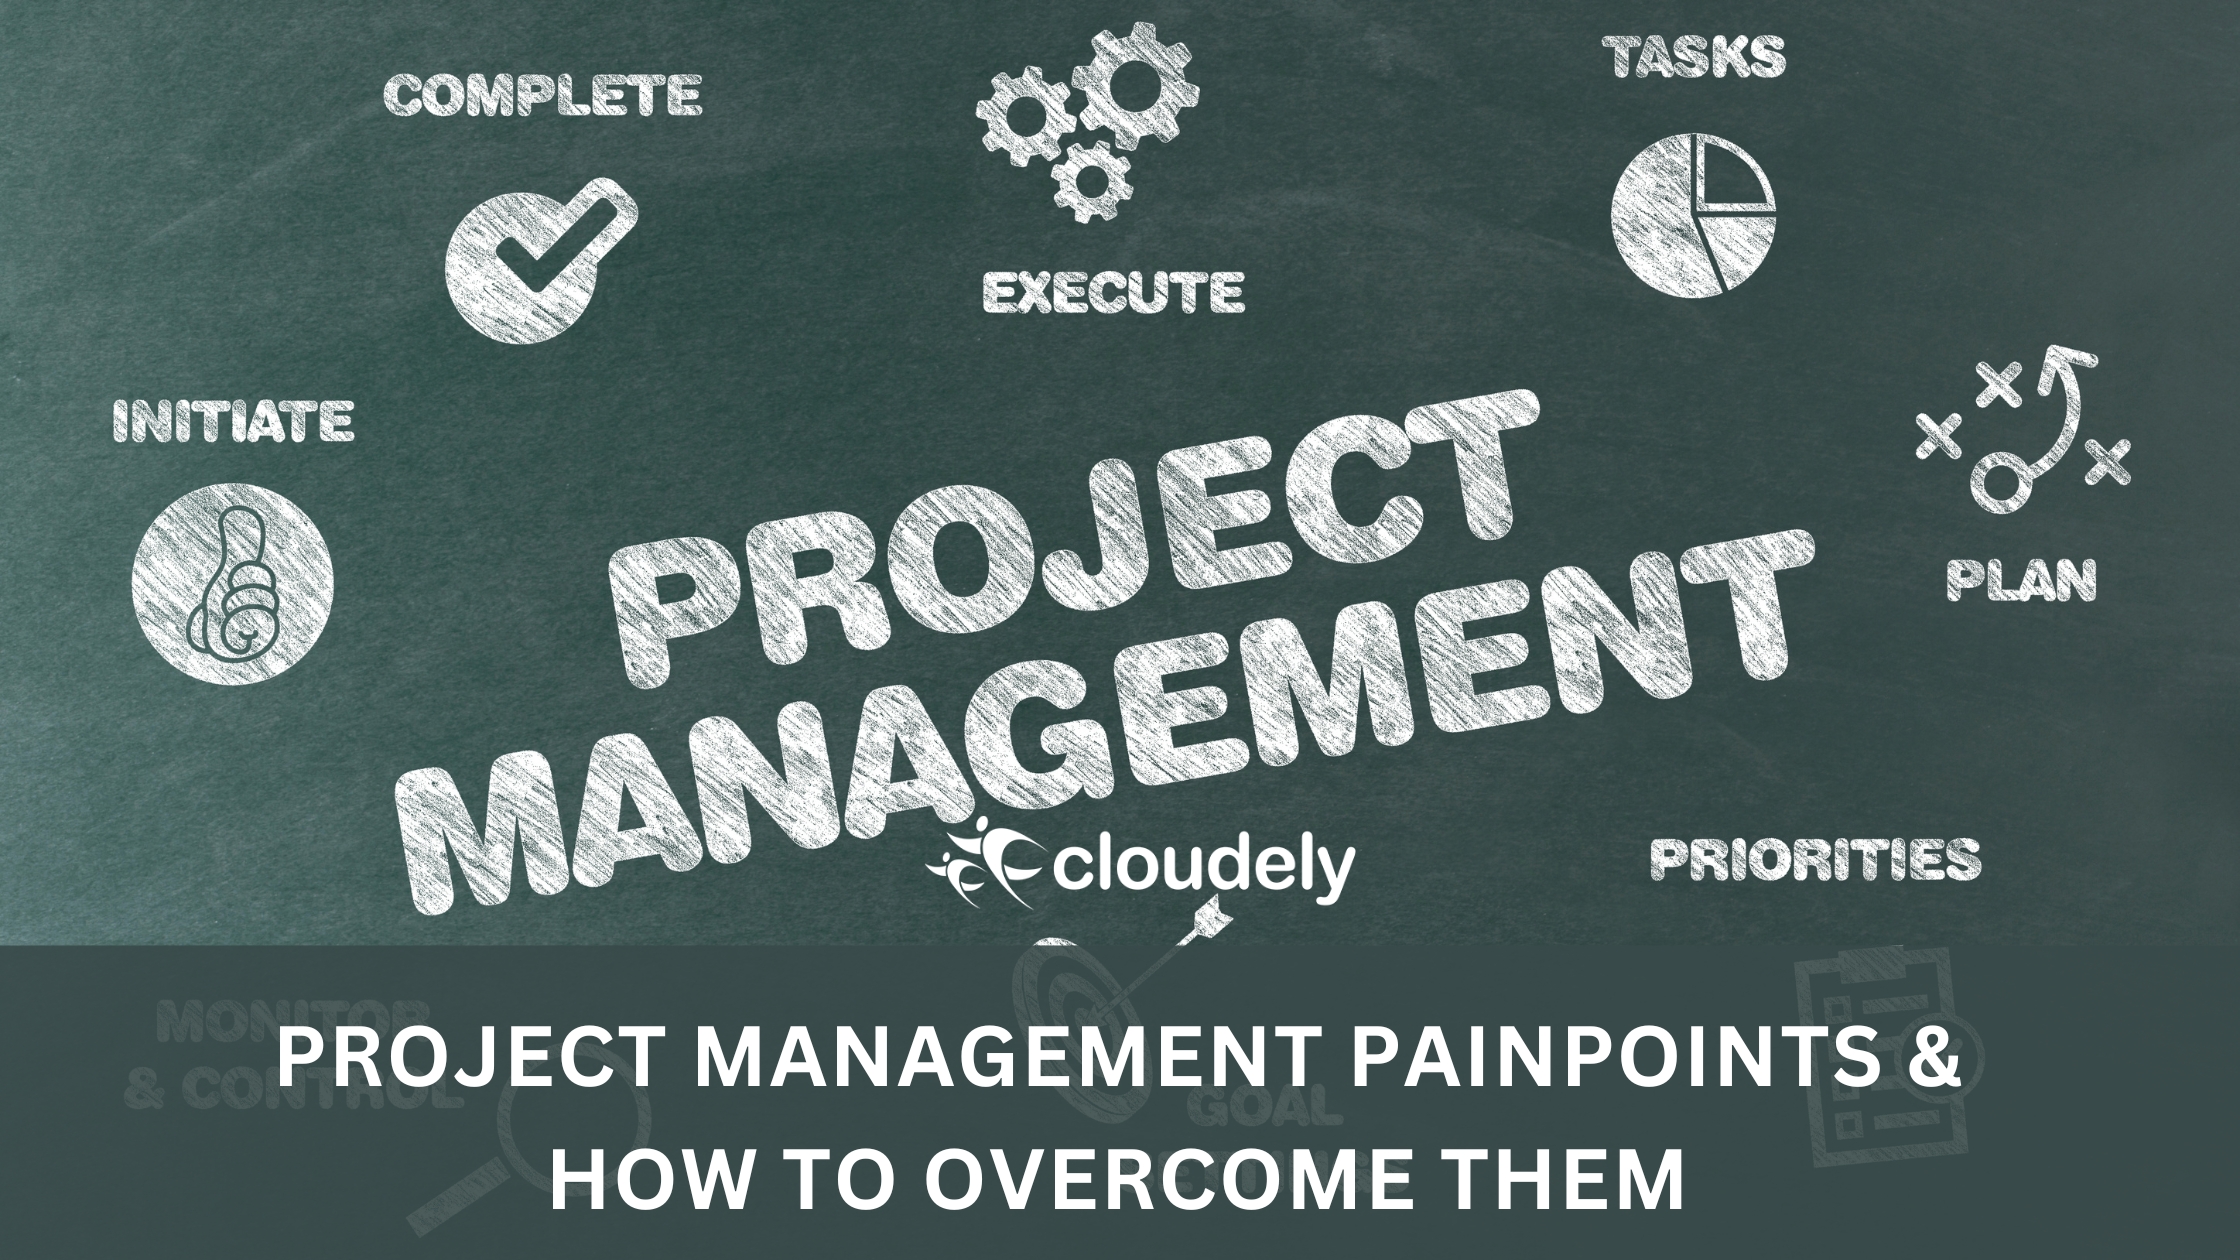 Project management painpoints and how to overcome them